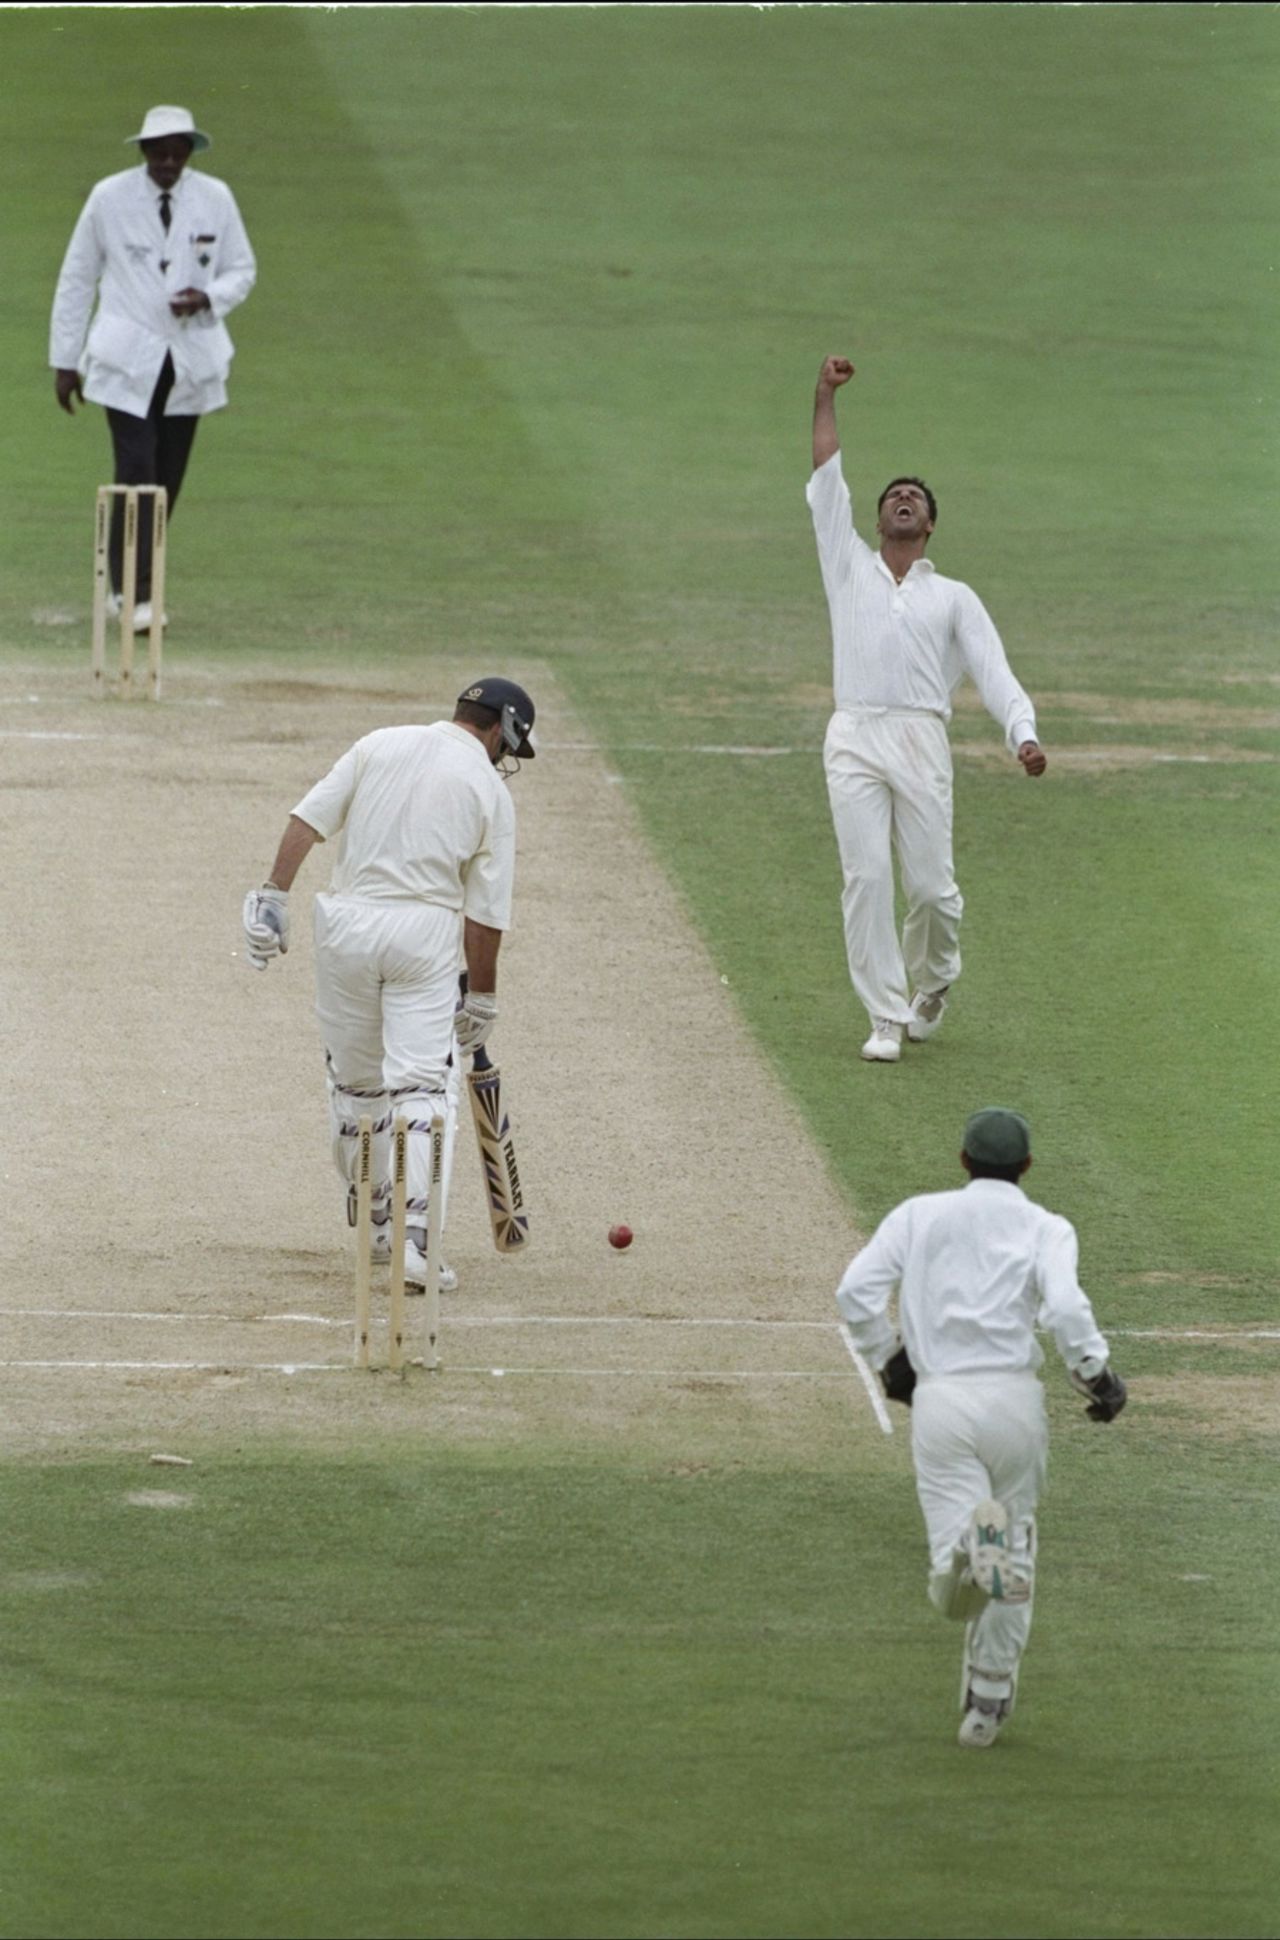 Waqar Younis bowls Graeme Hick, England v Pakistan, first Test, Lord's 1996